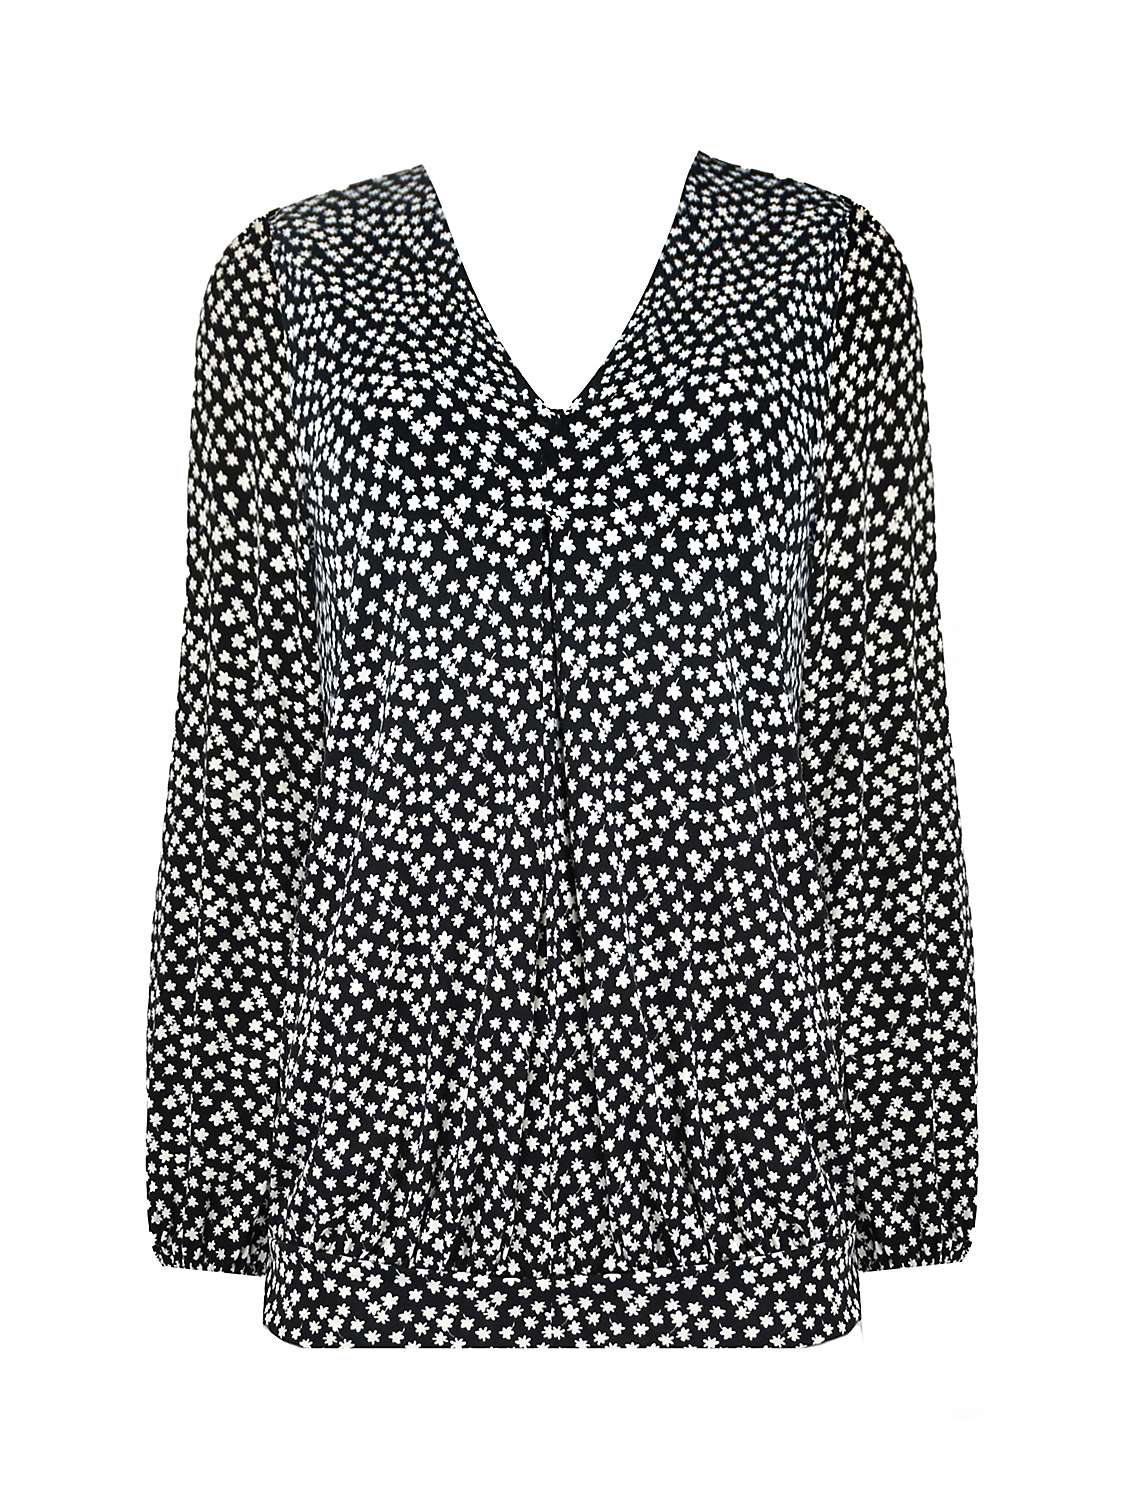 Buy Live Unlimited Curve Ditsy Print Pleat Front Top, Black/White Online at johnlewis.com